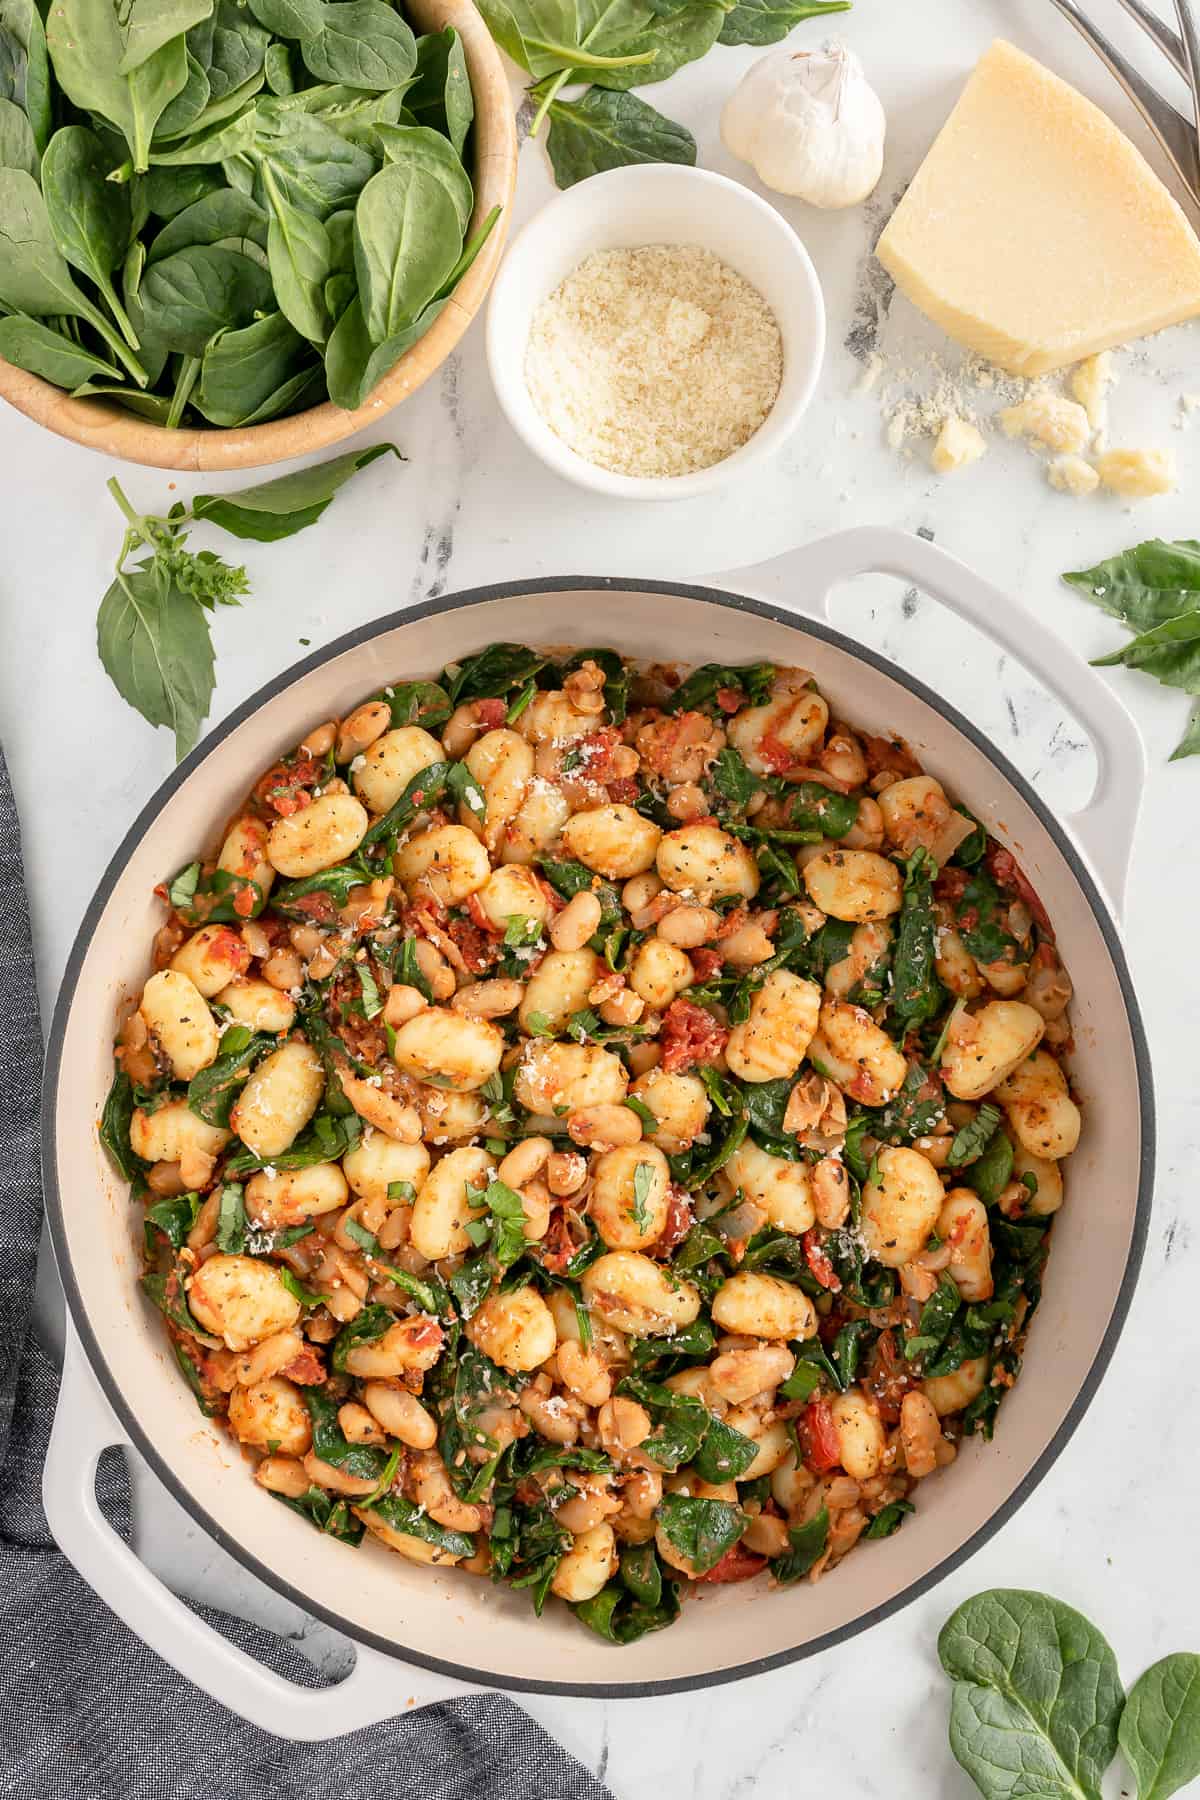 A pot of gnocchi with white beans next to spinach and parmesan.